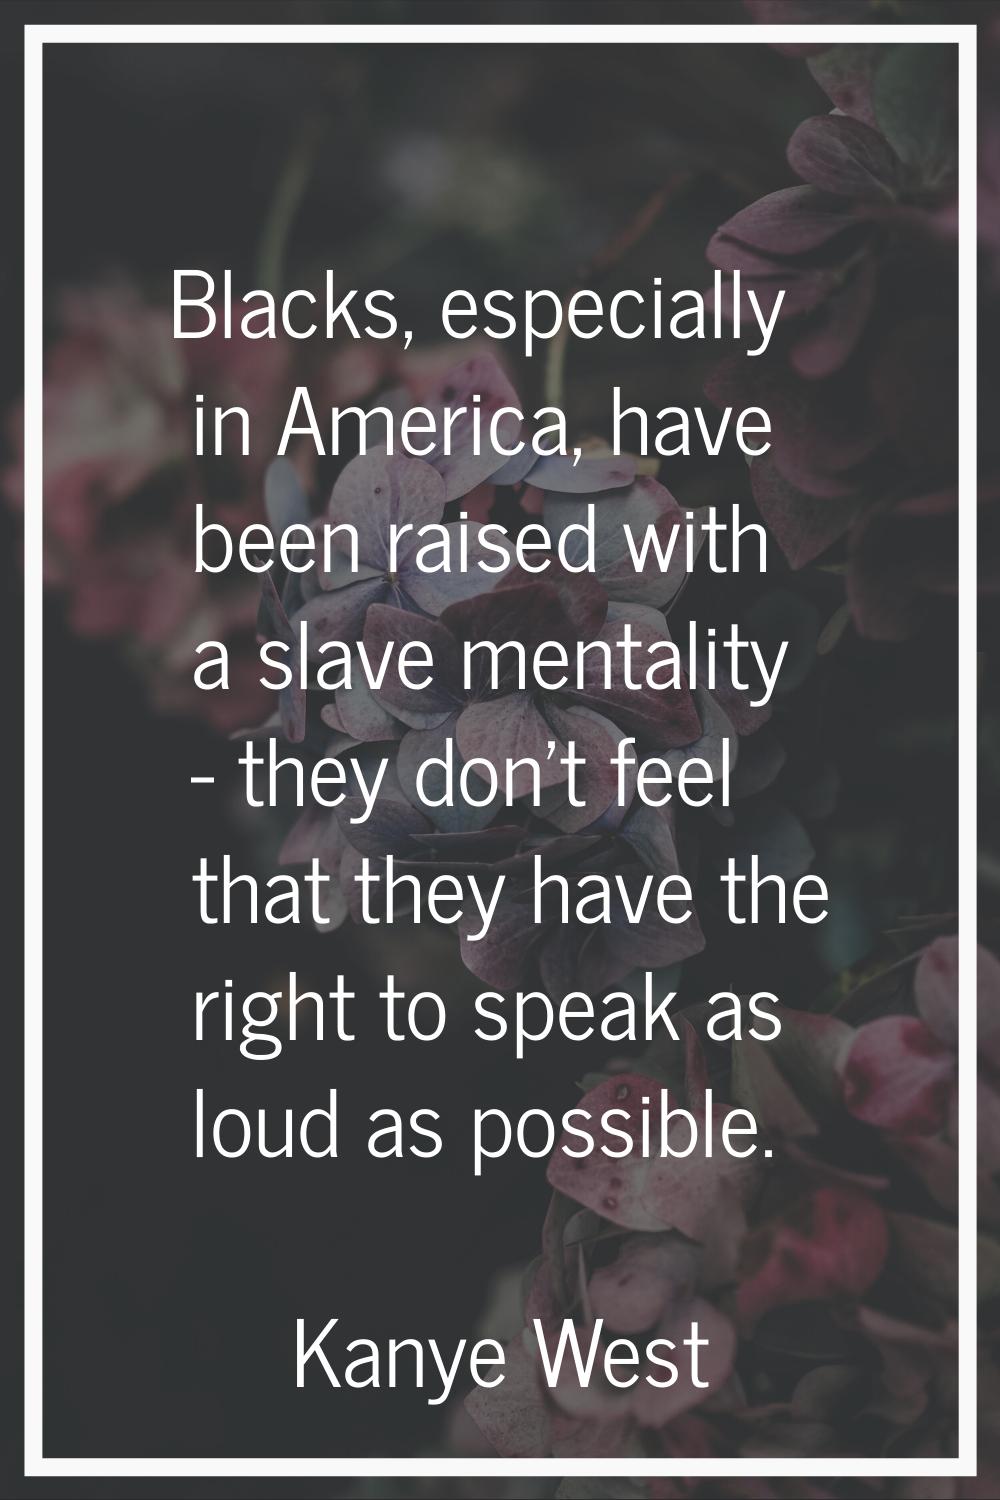 Blacks, especially in America, have been raised with a slave mentality - they don't feel that they 